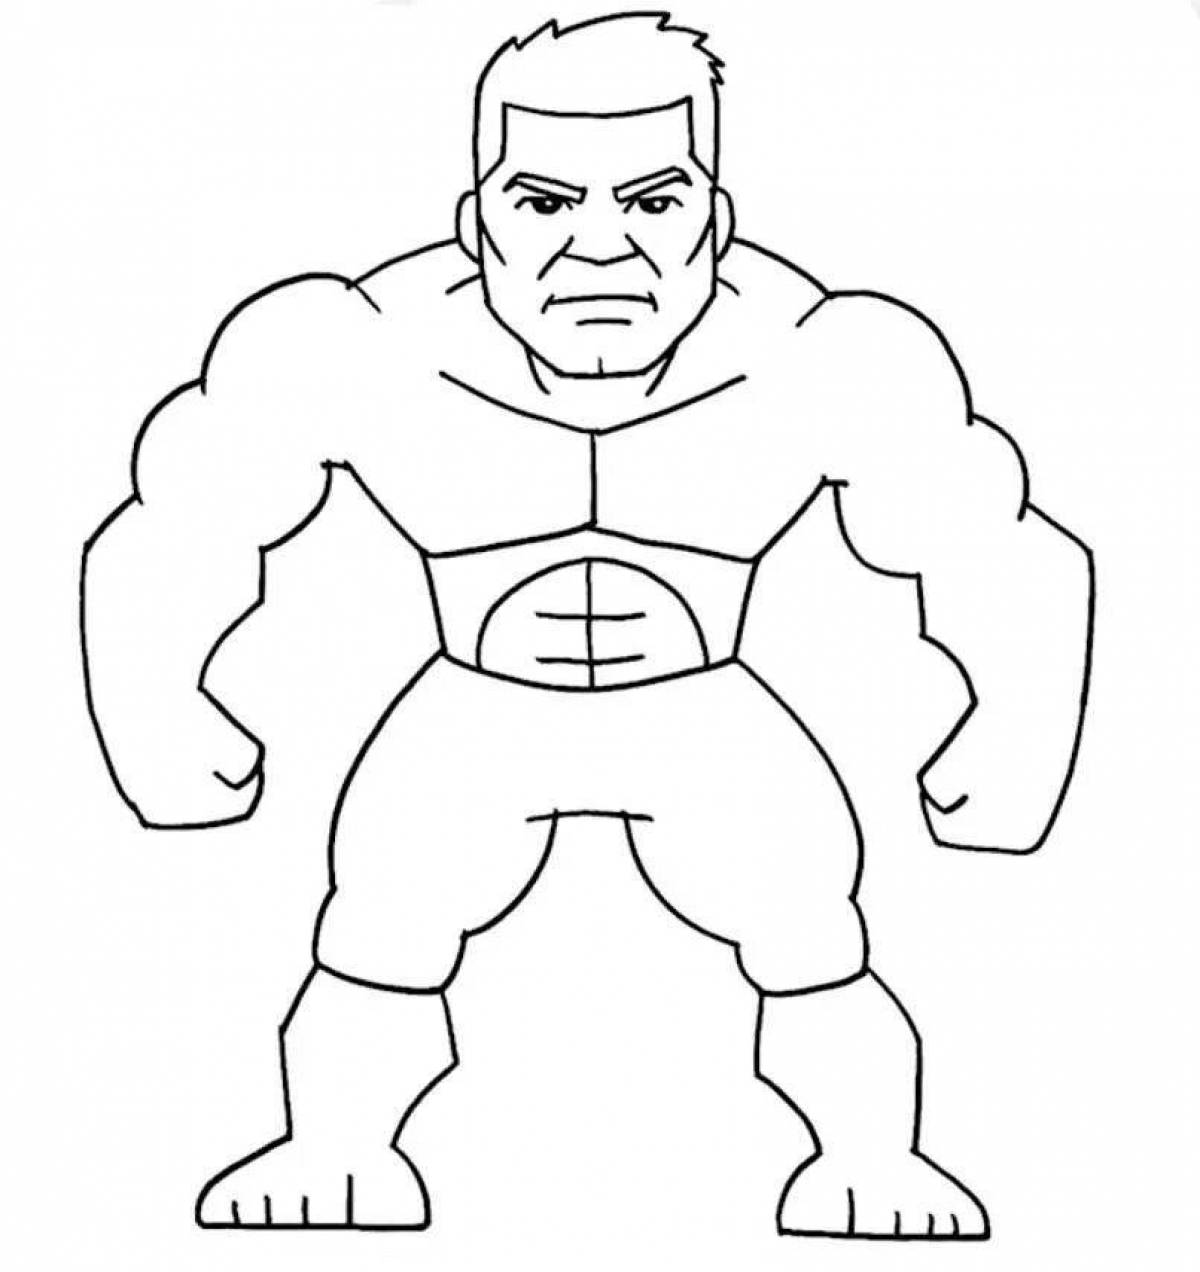 Hulk coloring book for kids 6-7 years old